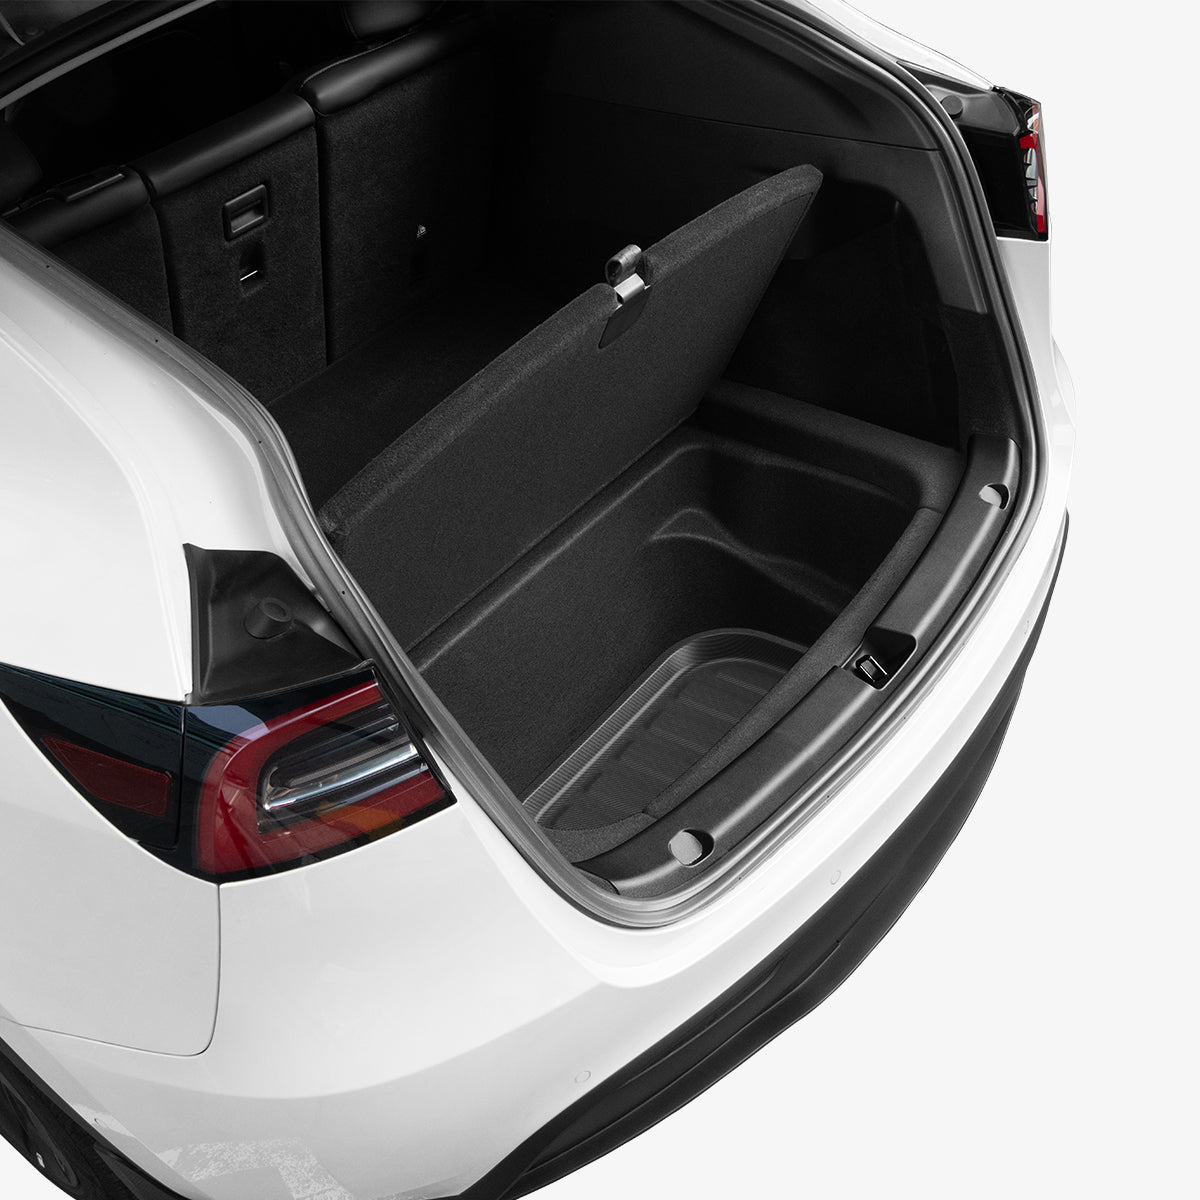 ACP06528 - Tesla Model Y Rear Trunk Storage Mat TL00-Y in Black showing the partial front inside a car's trunk